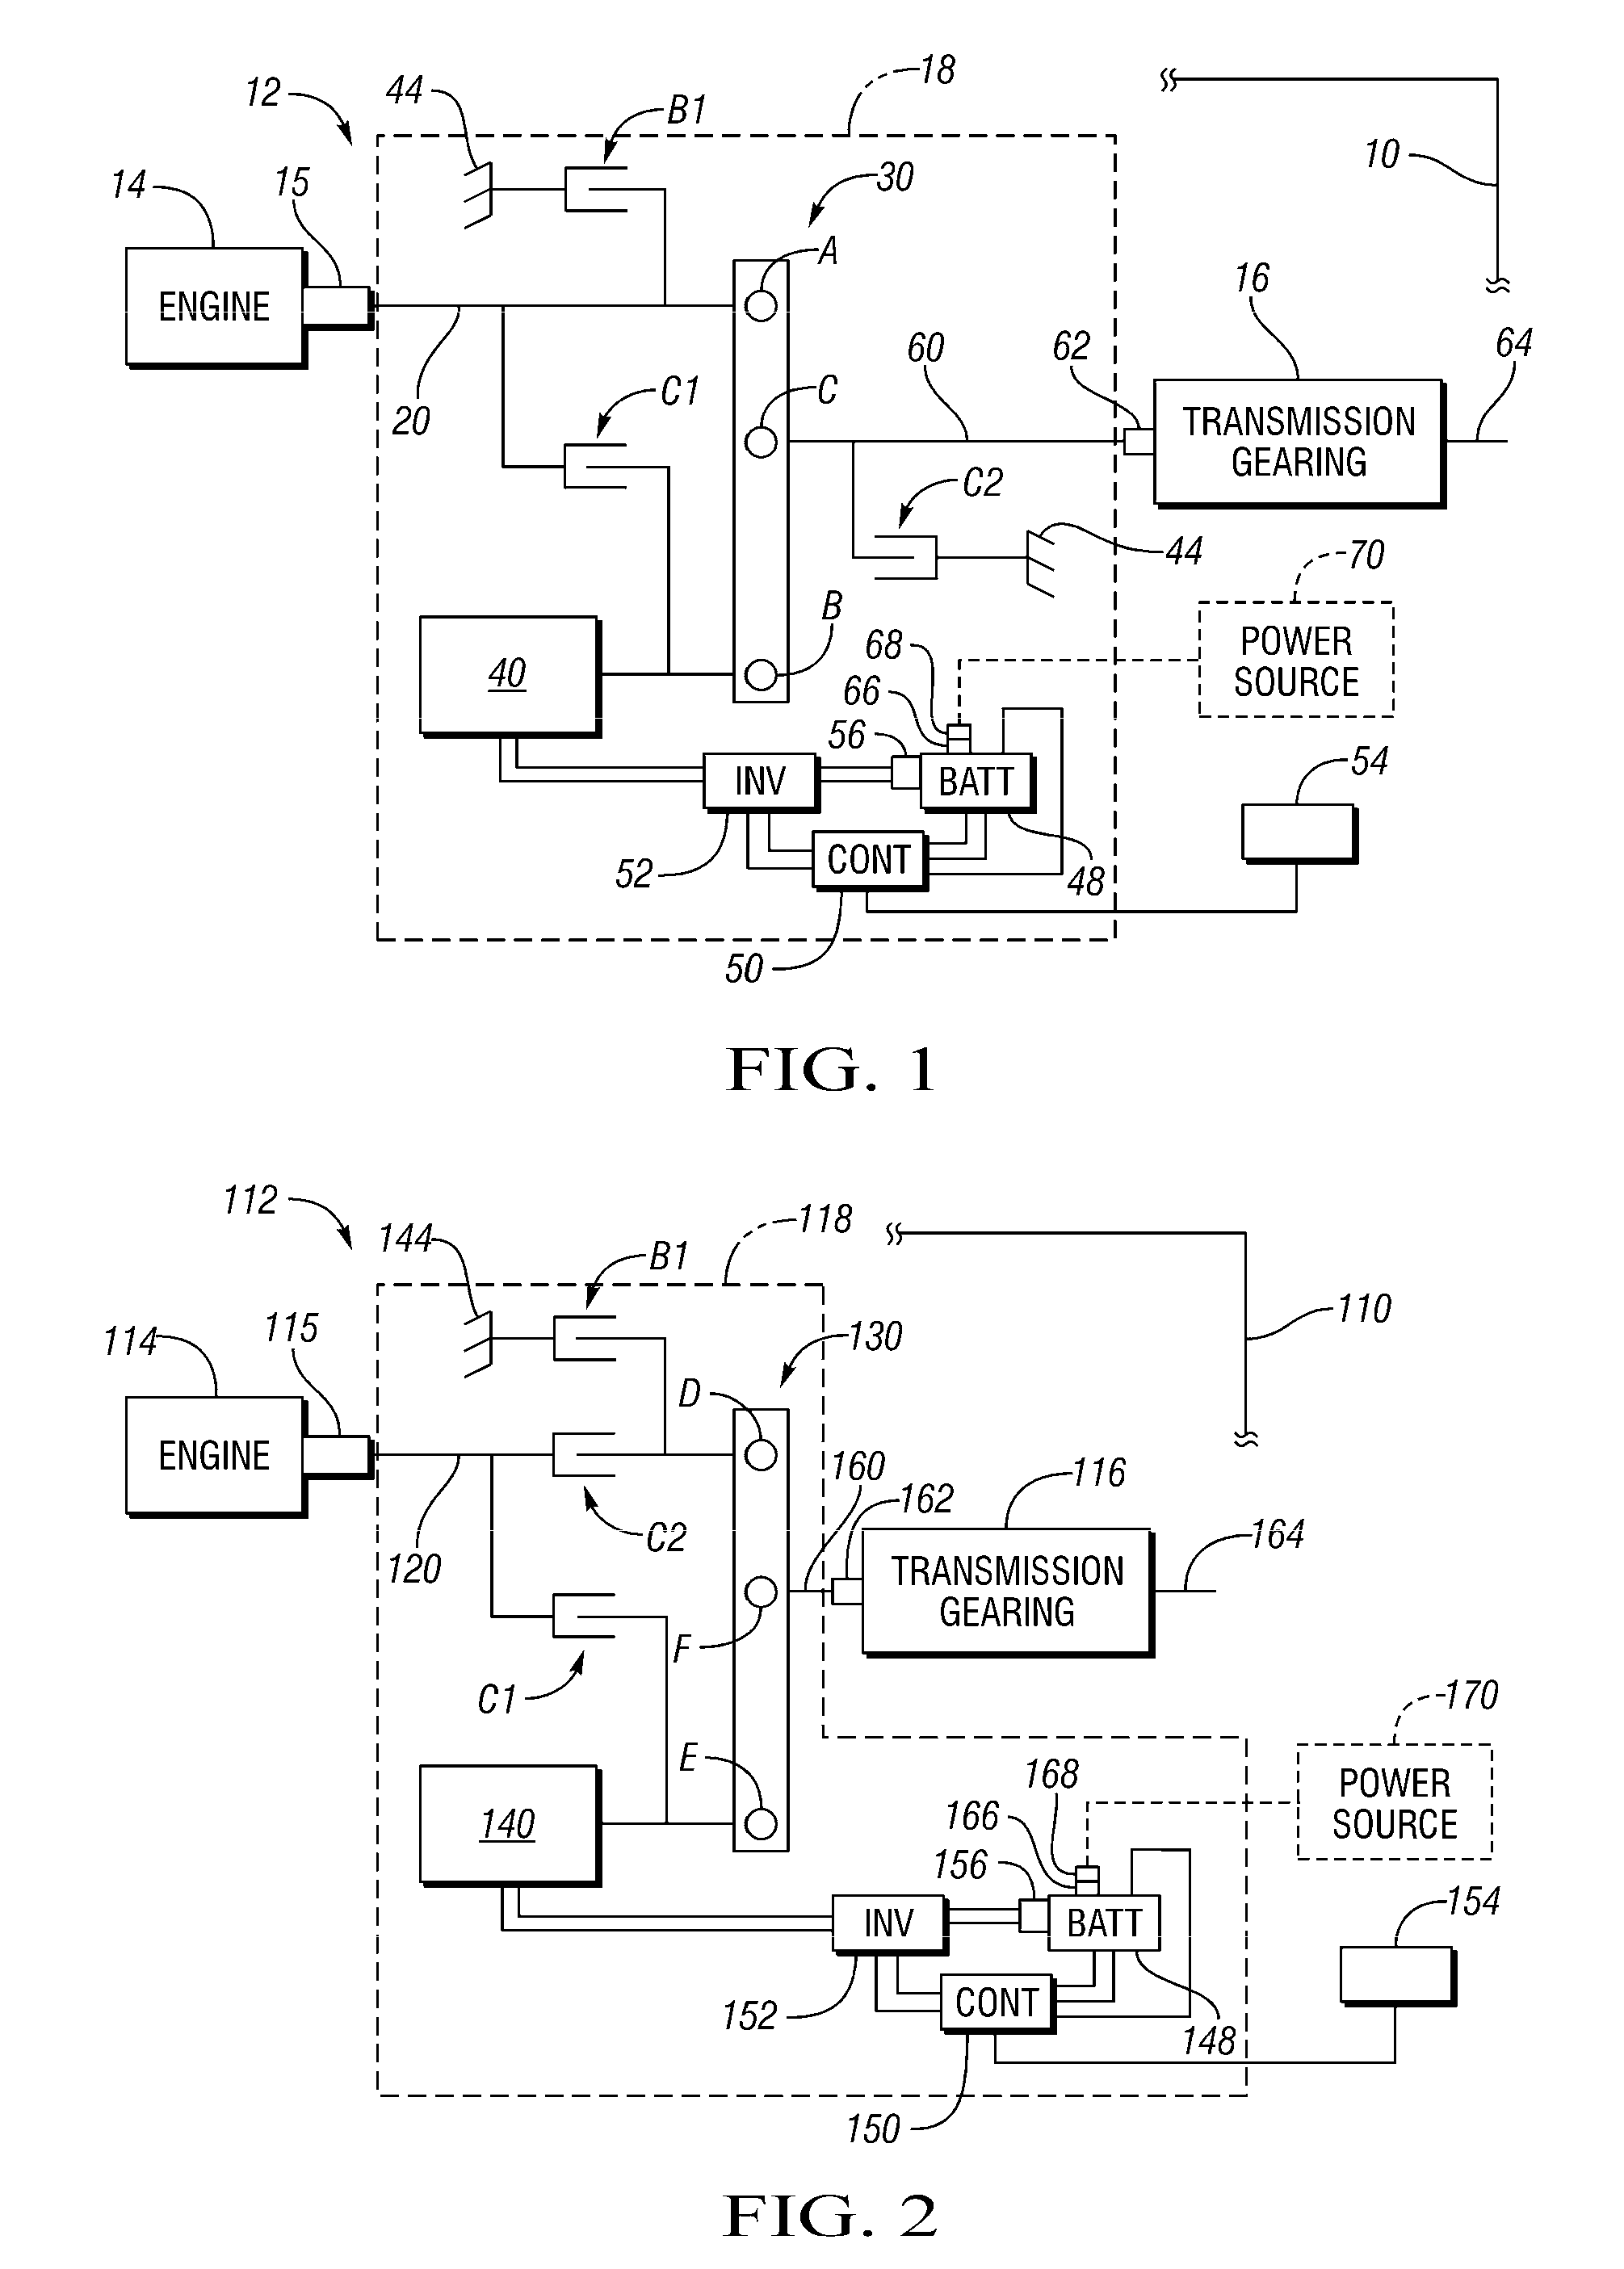 Electric Torque Converter for a Powertrain and Method of Operating a Vehicle